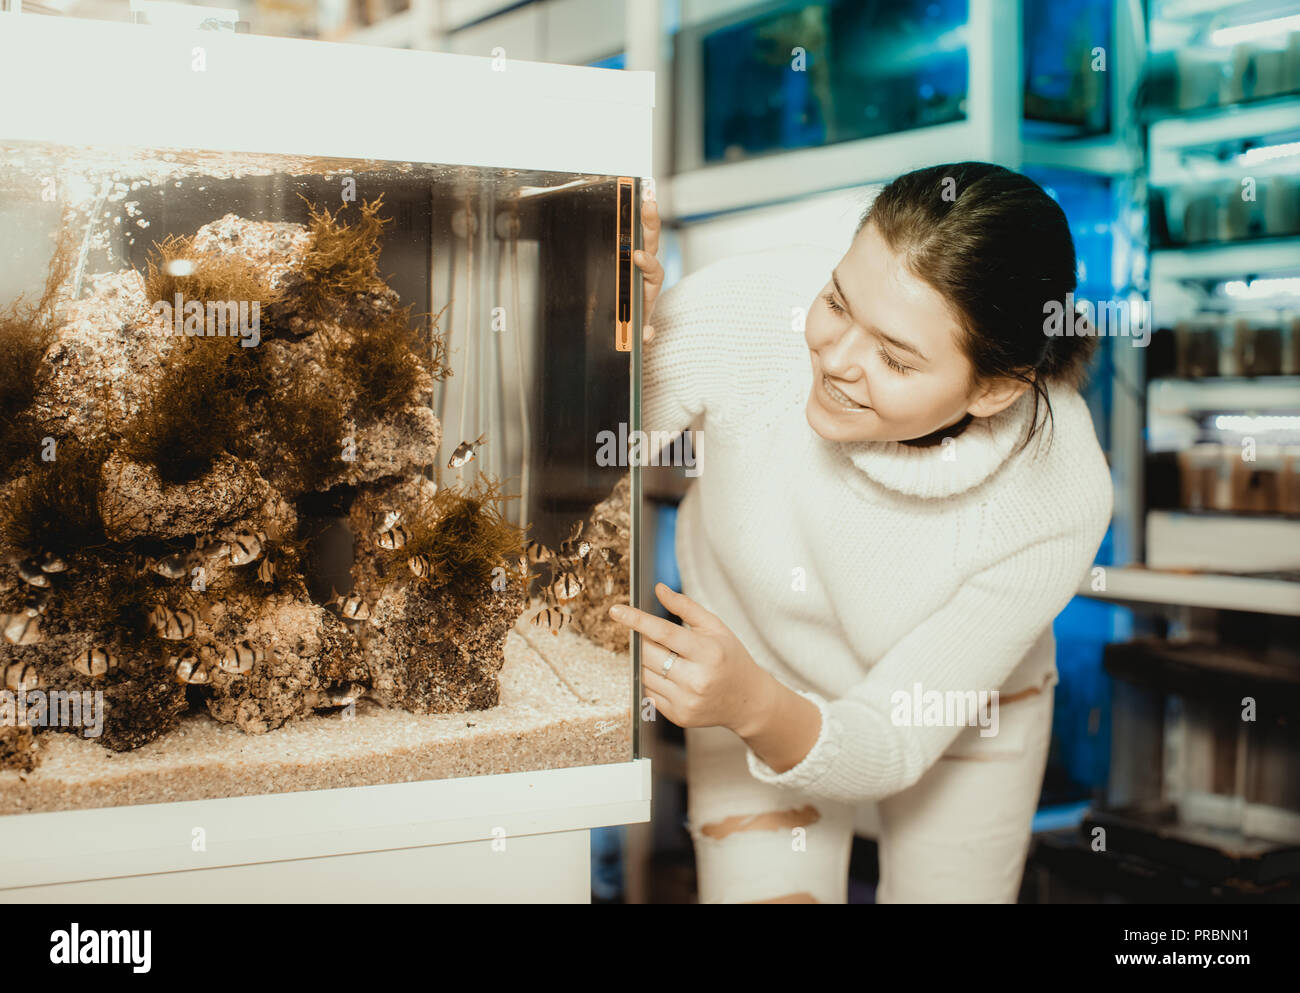 Teenager is looking at striped and colorful fishes in aquarium with rocks and algae. Stock Photo